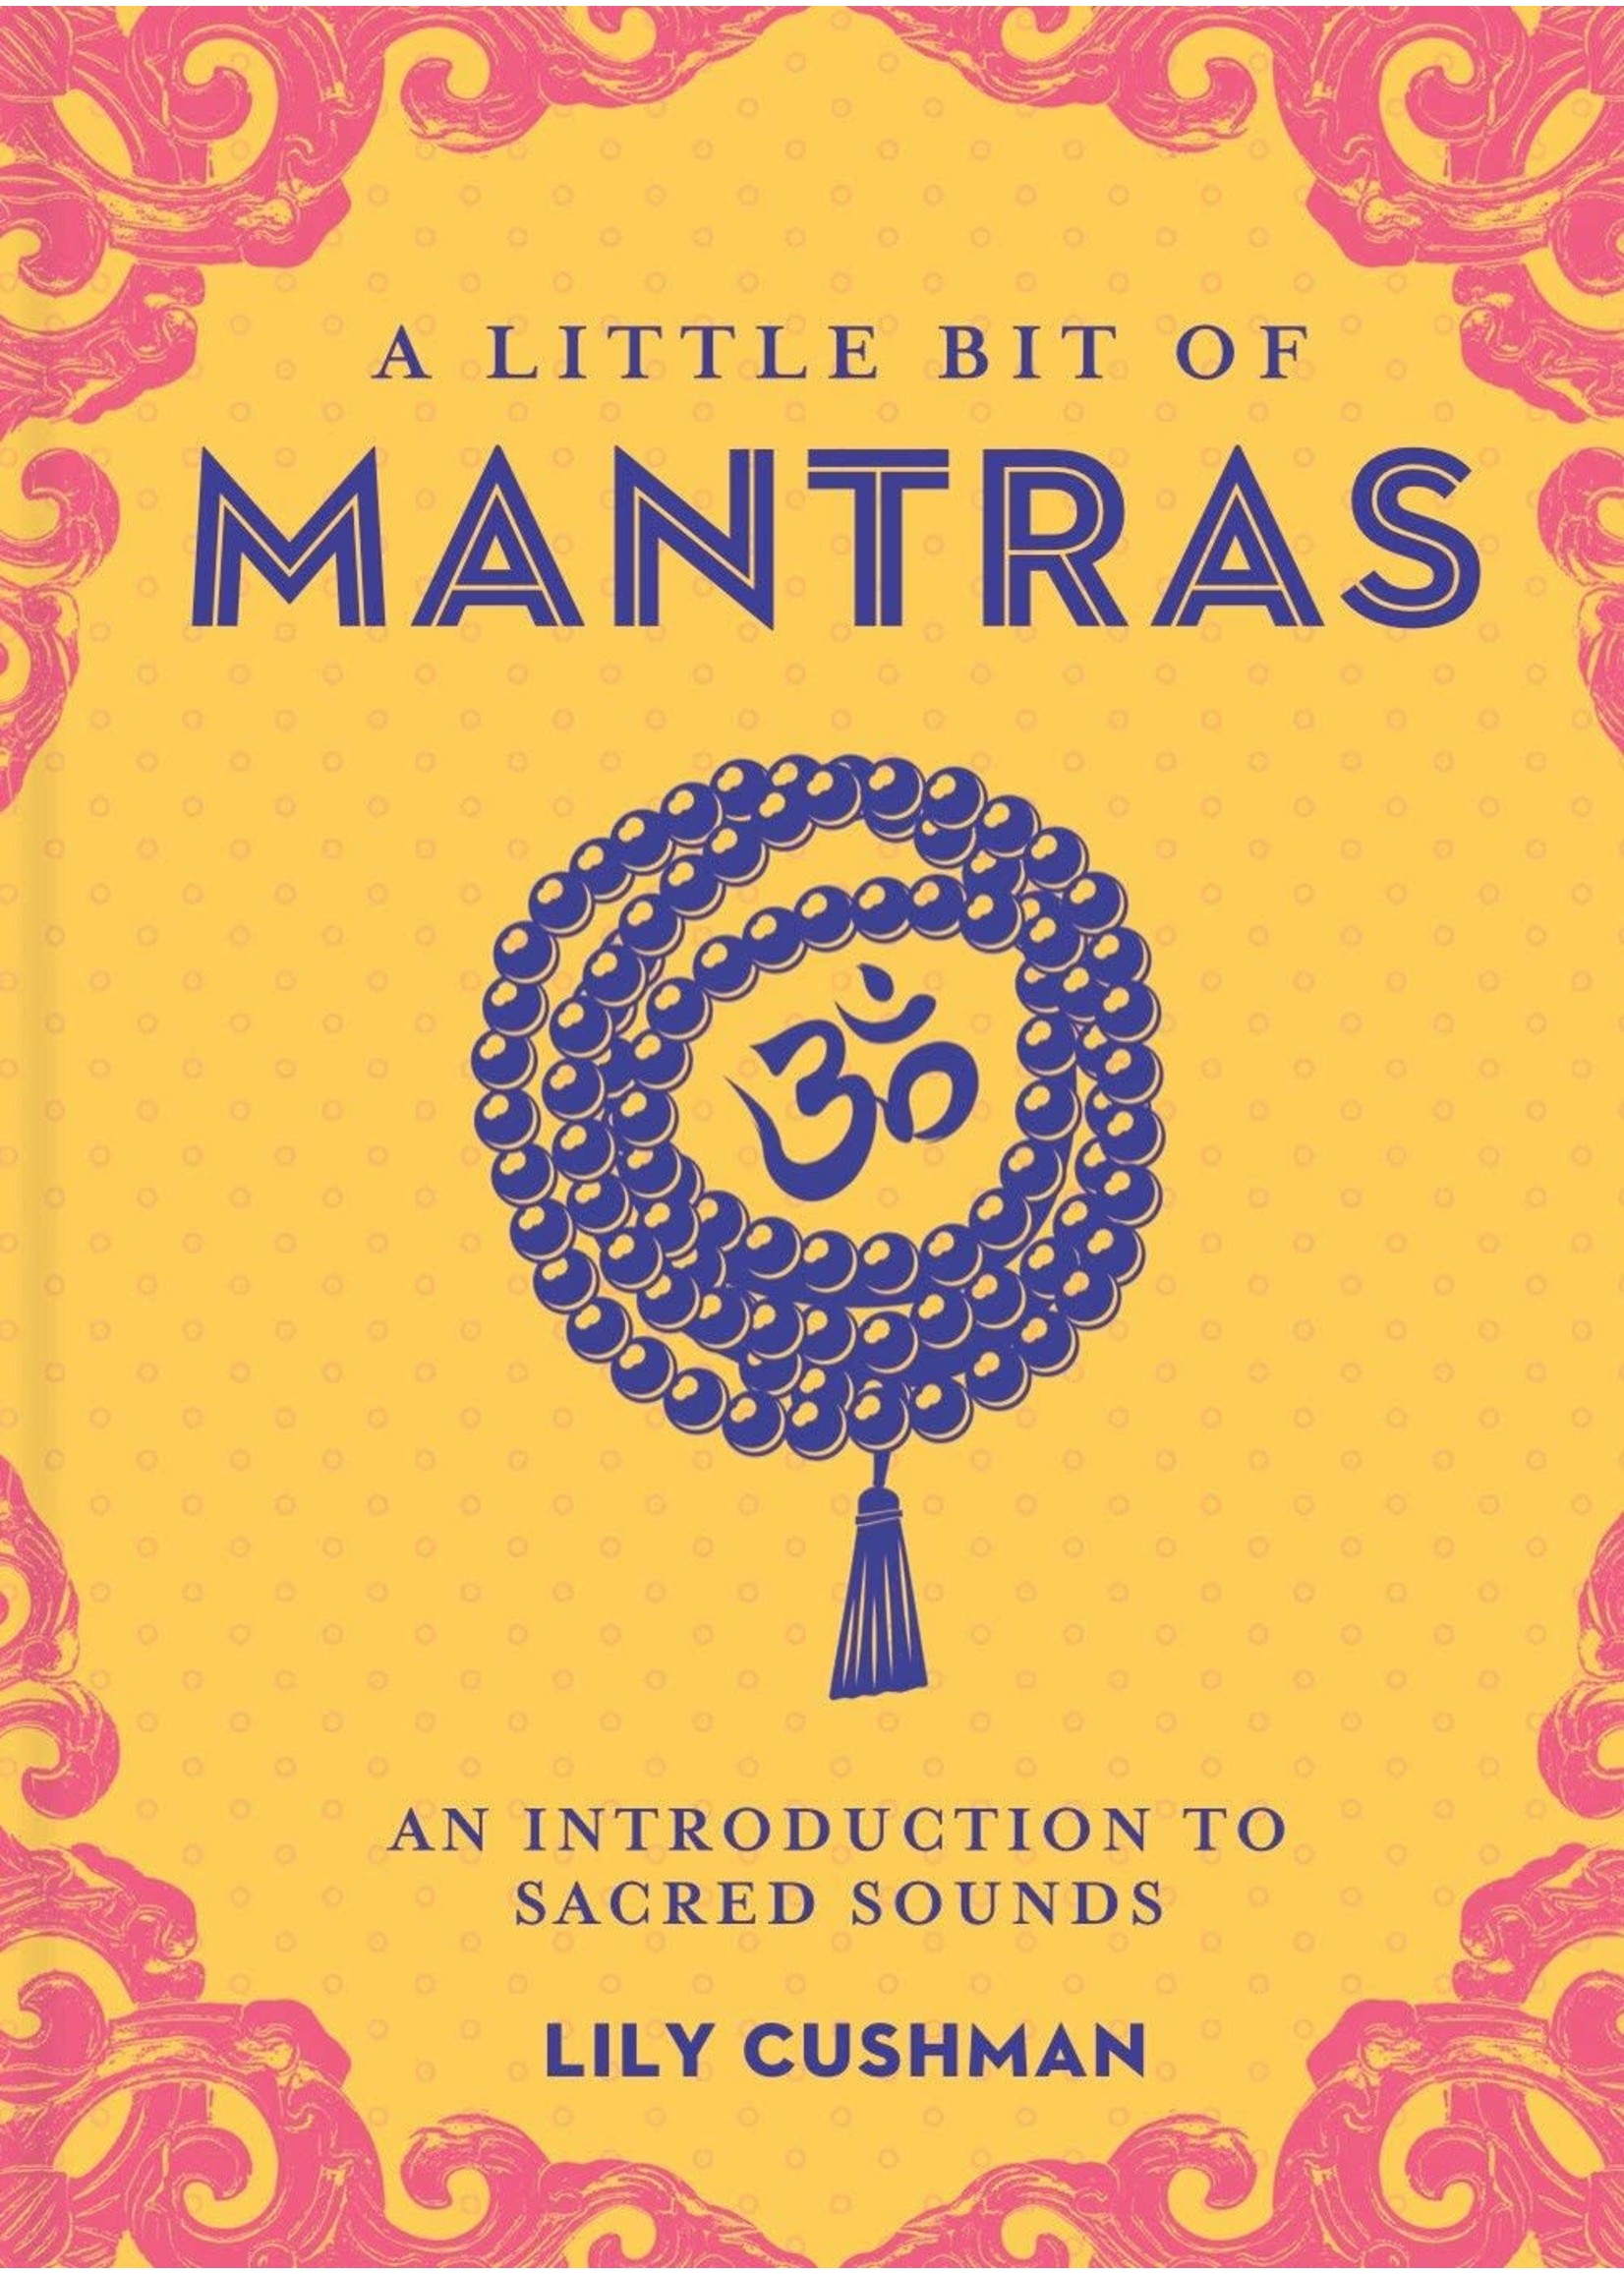 A Little Bit of Mantras- An Introduction to Sacred Sounds